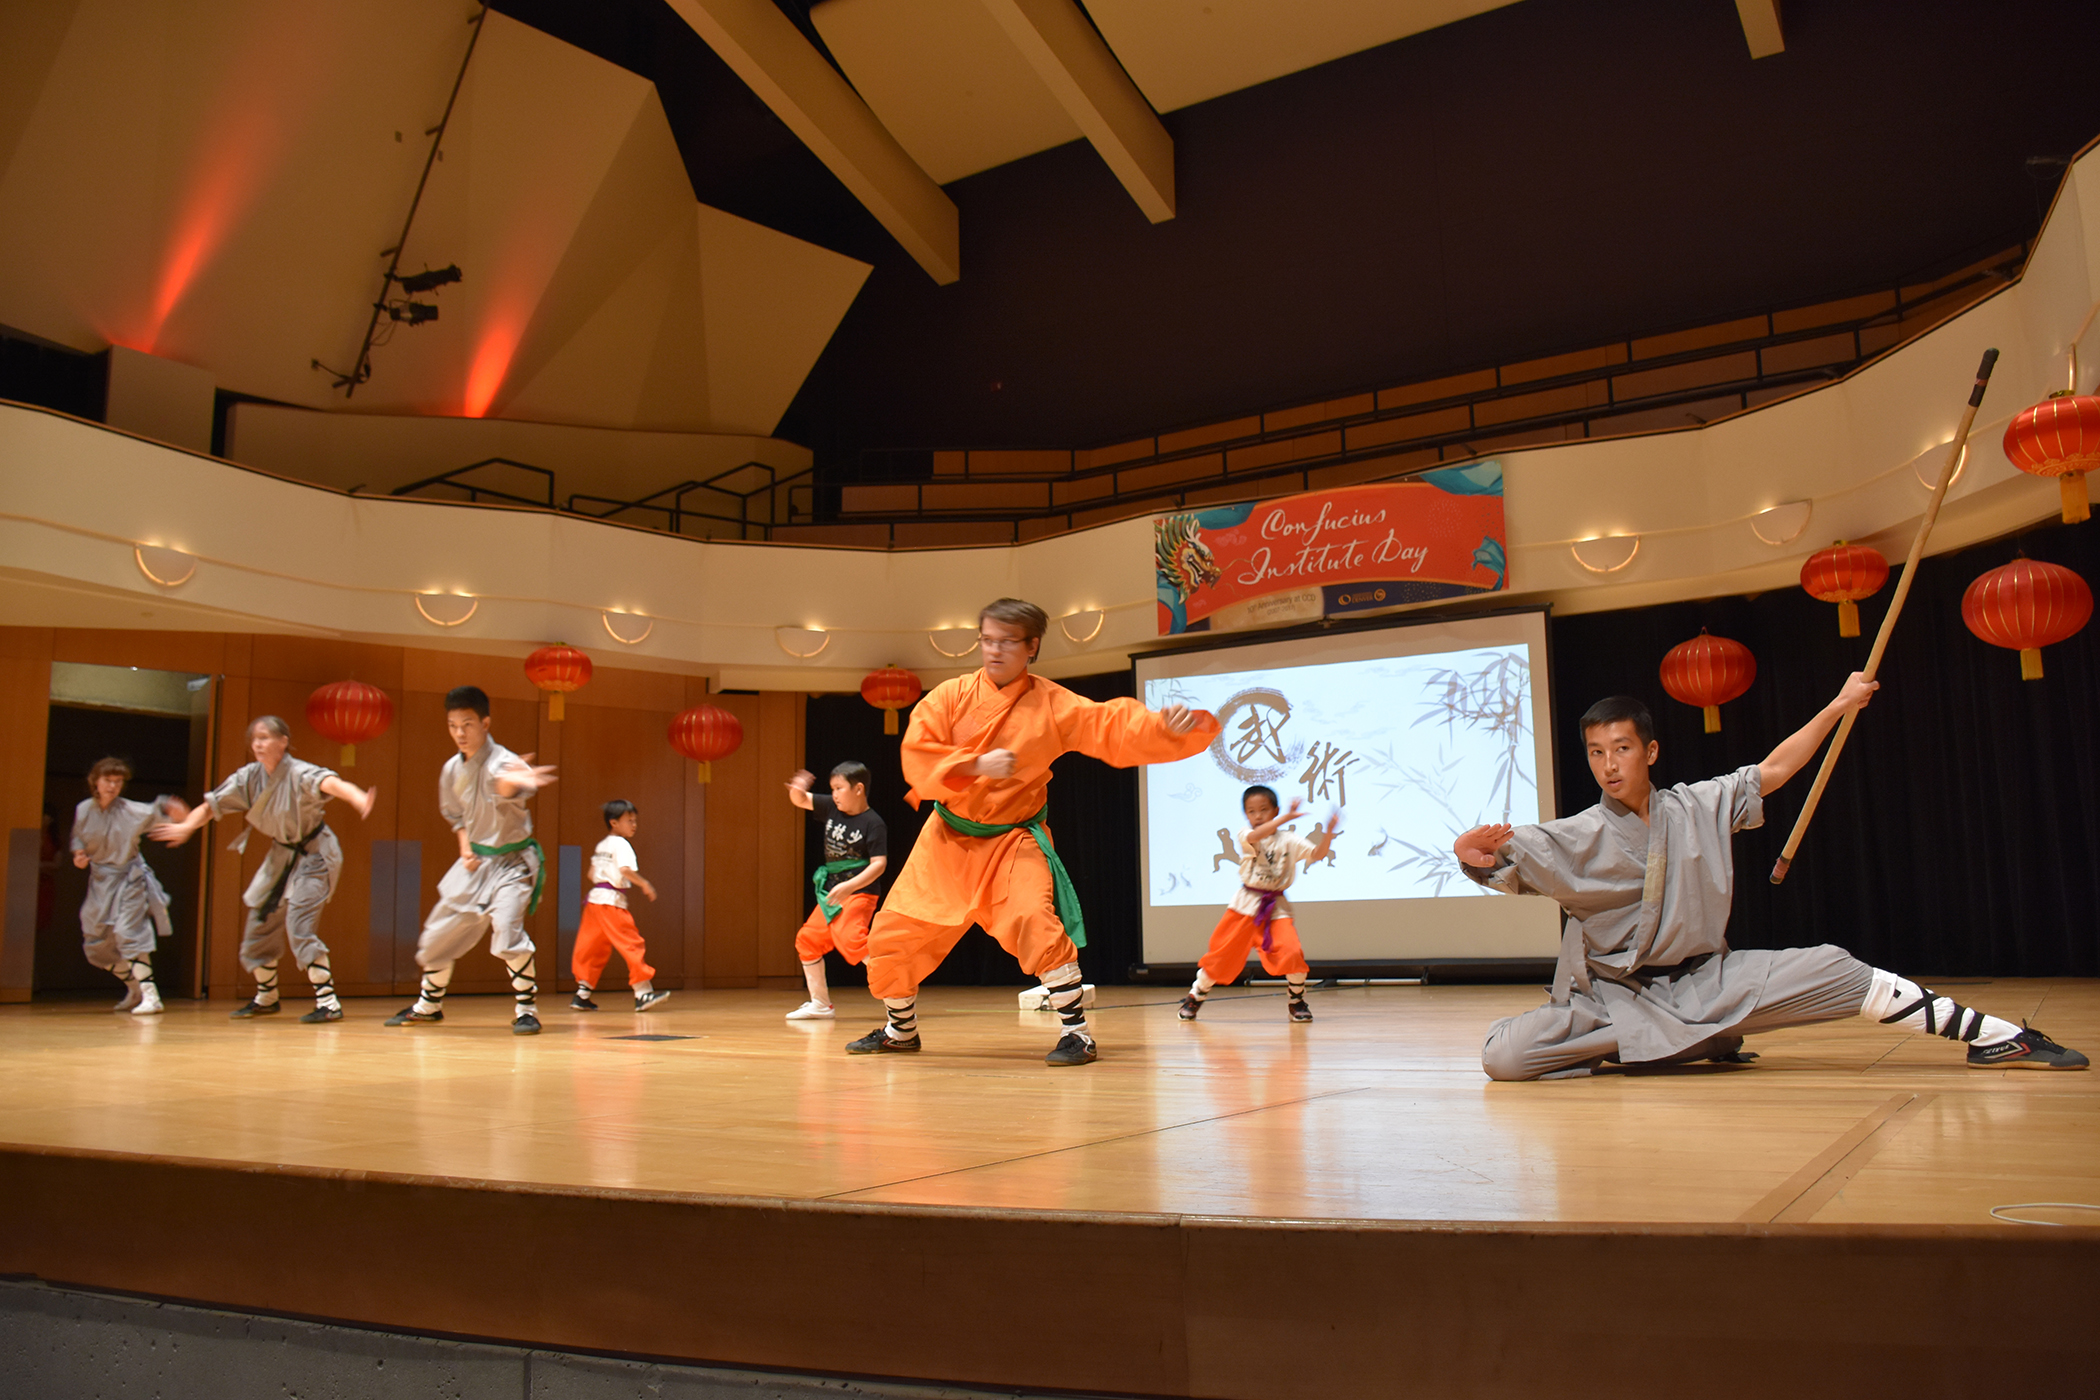 Kung fu performance on stage